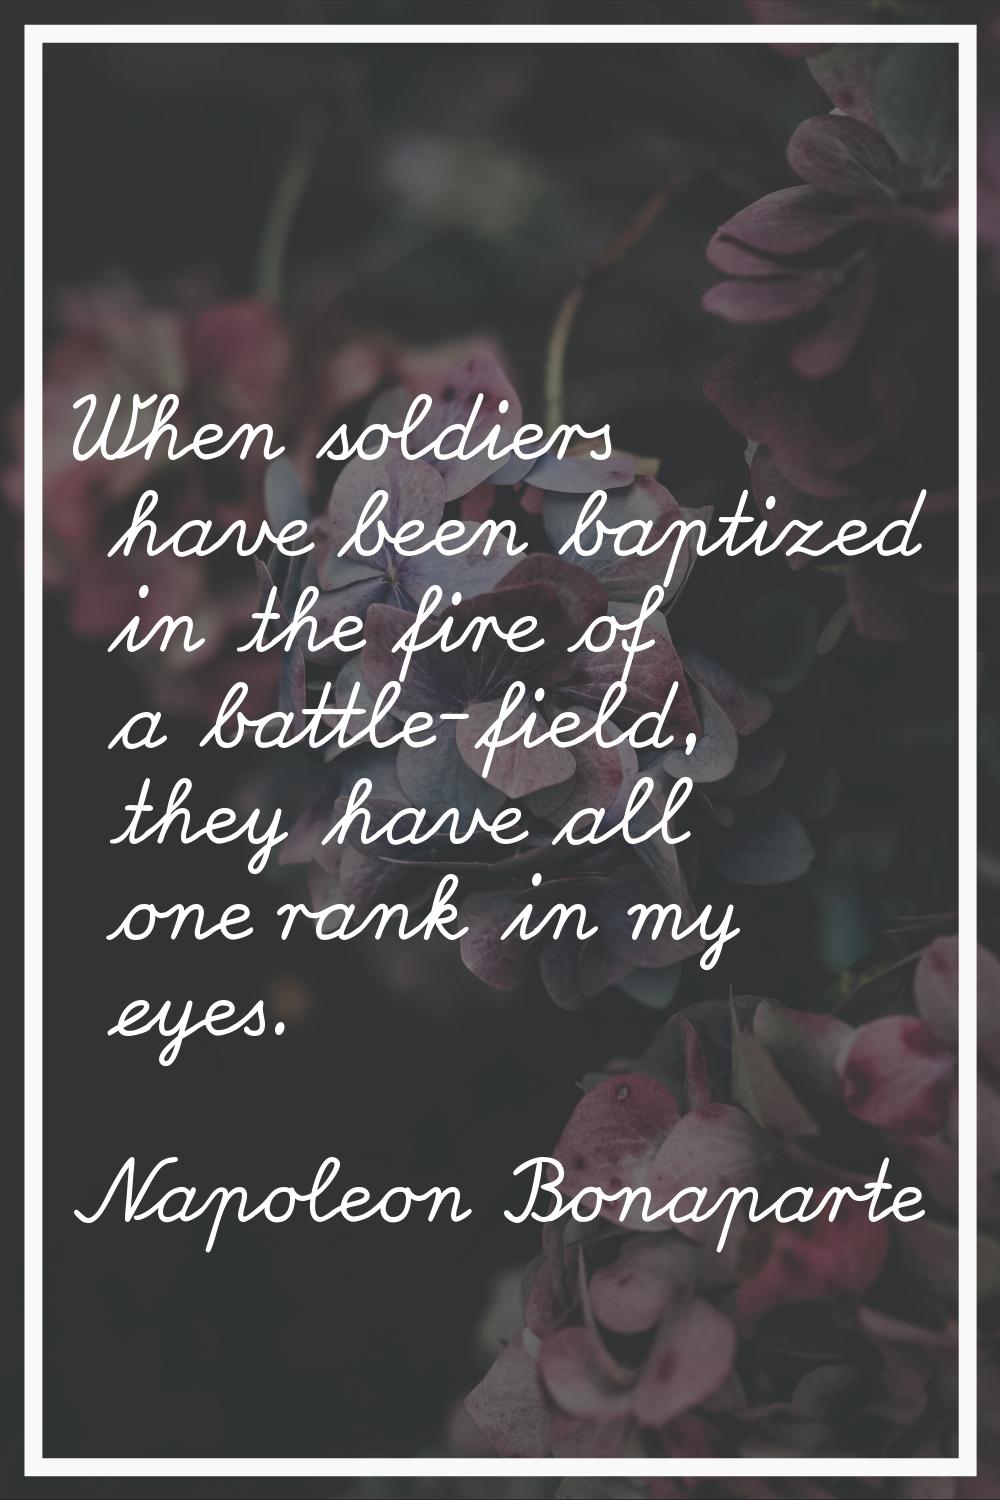 When soldiers have been baptized in the fire of a battle-field, they have all one rank in my eyes.